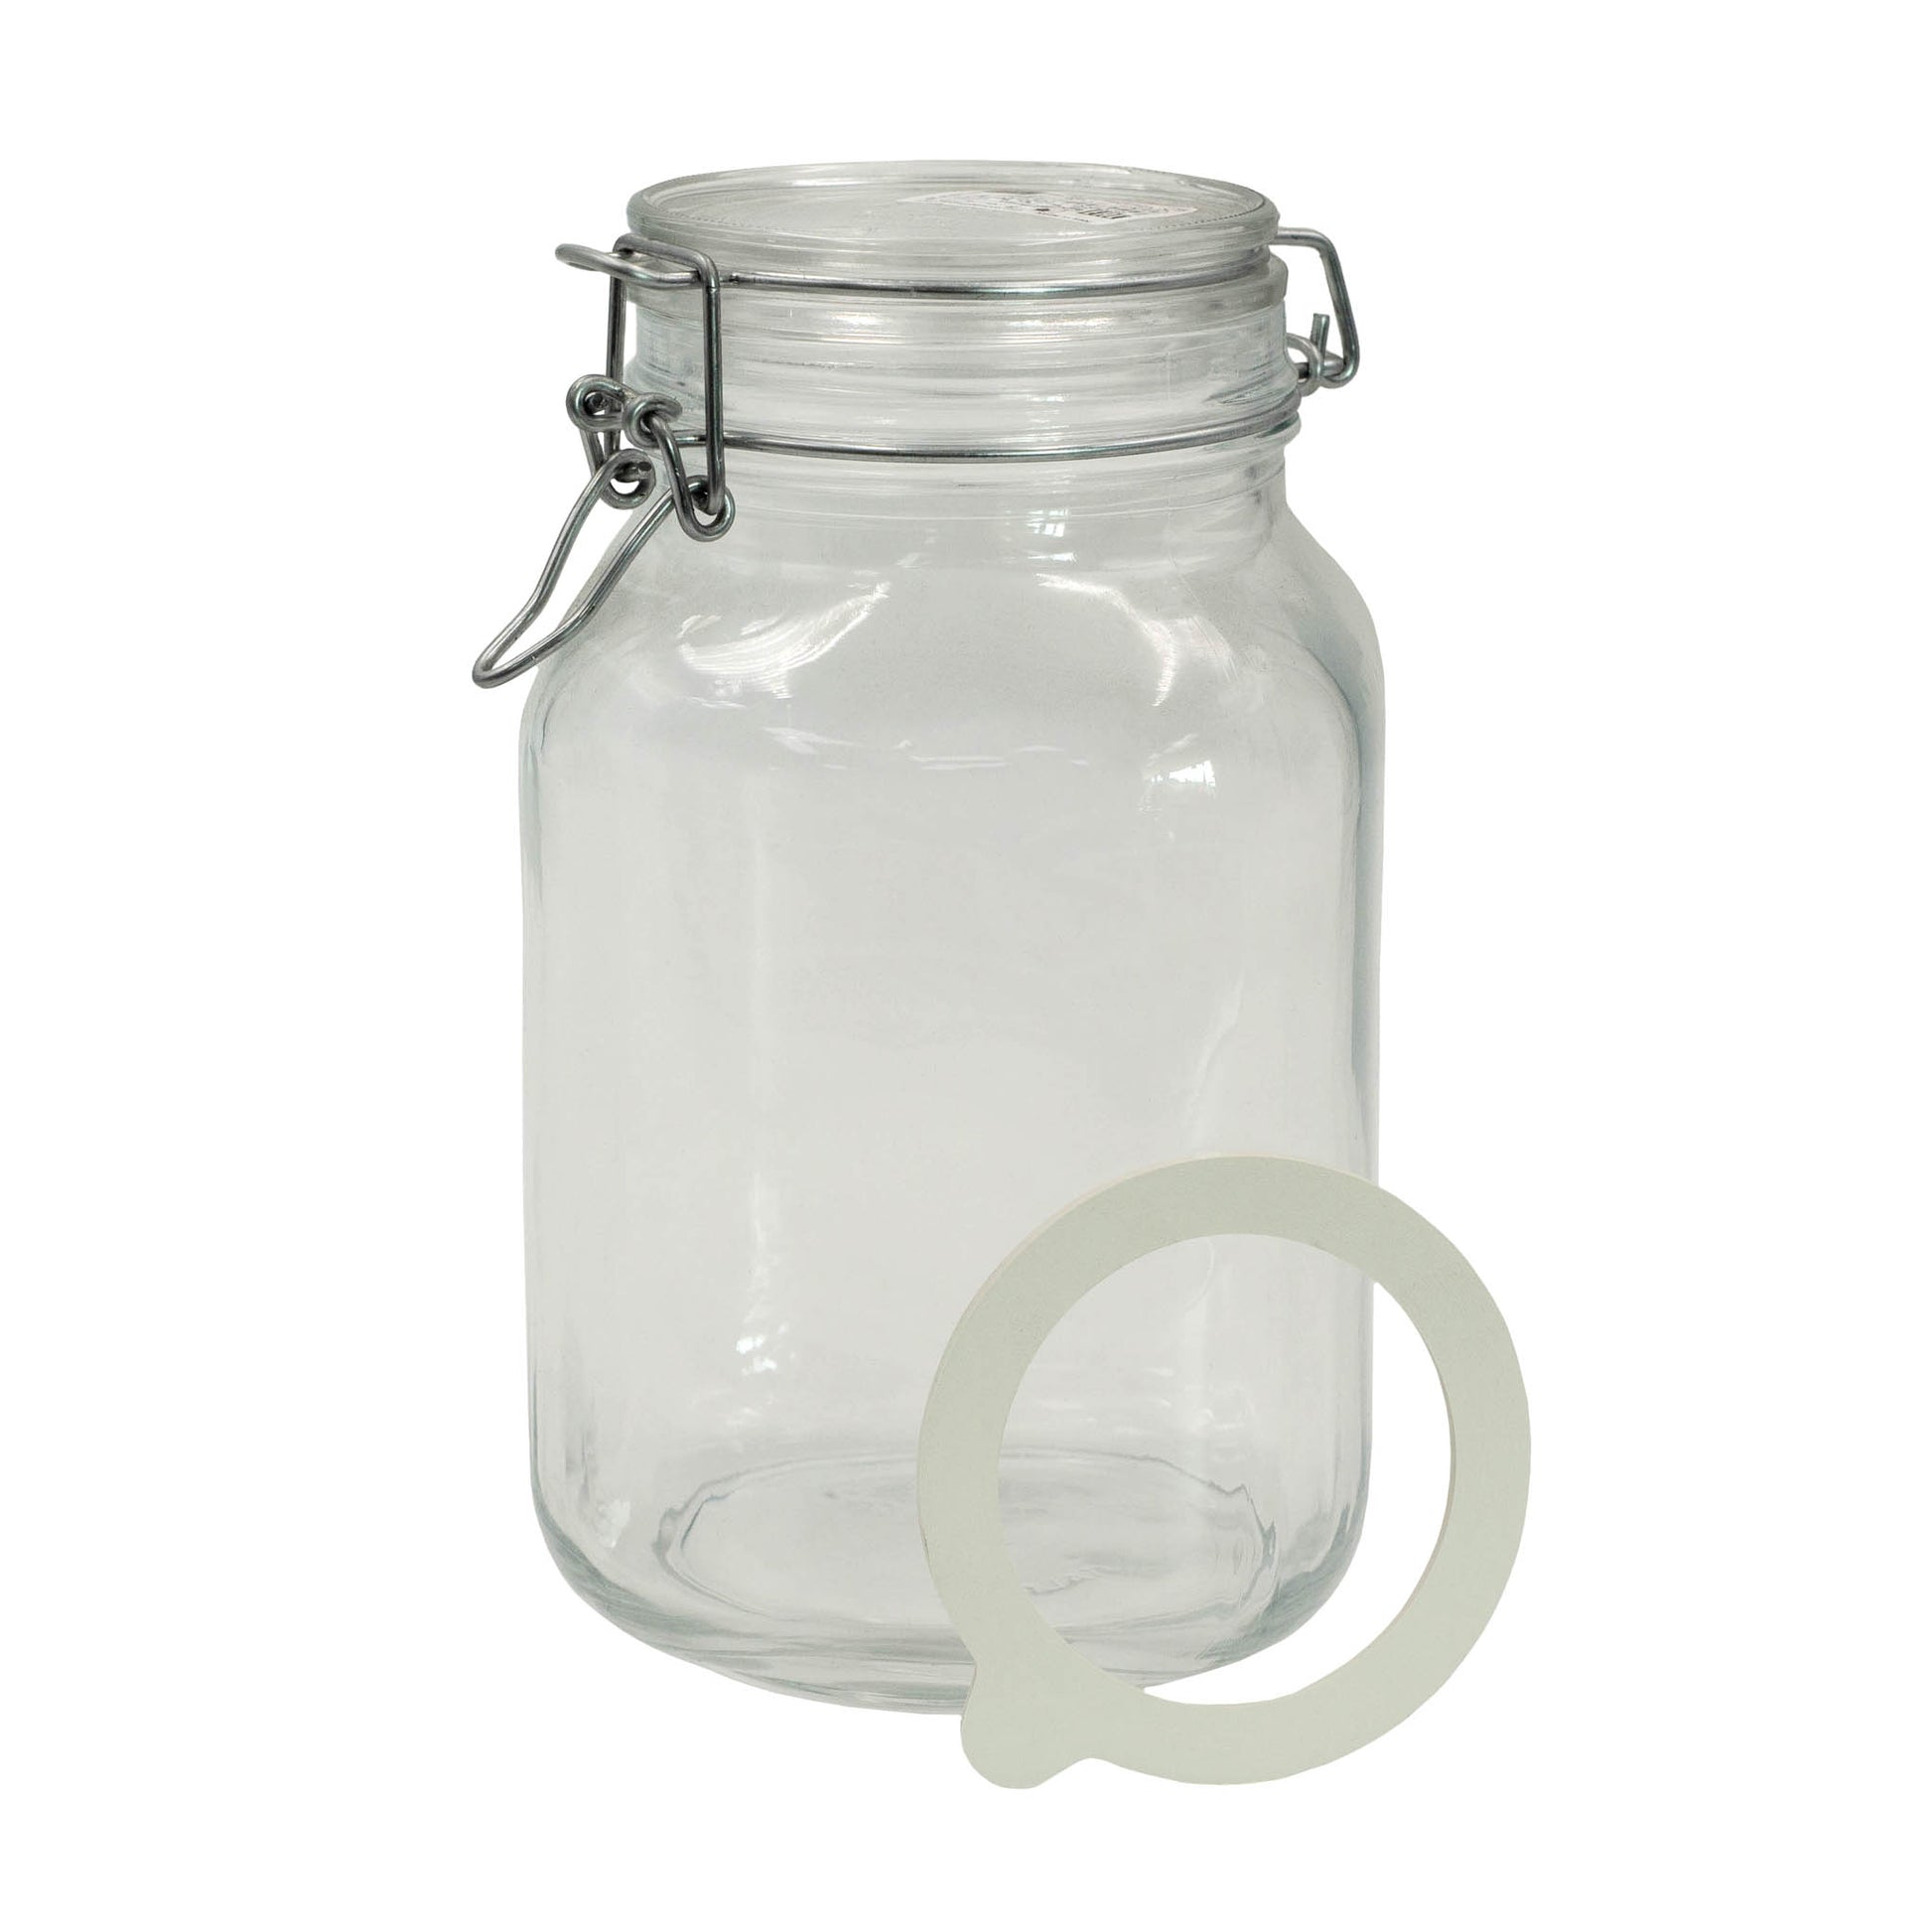 Italian made 2 litre FIDO jar with swing lid and rubber seal. For storing and fermenting oils, pickles, chutney or dry foods. 